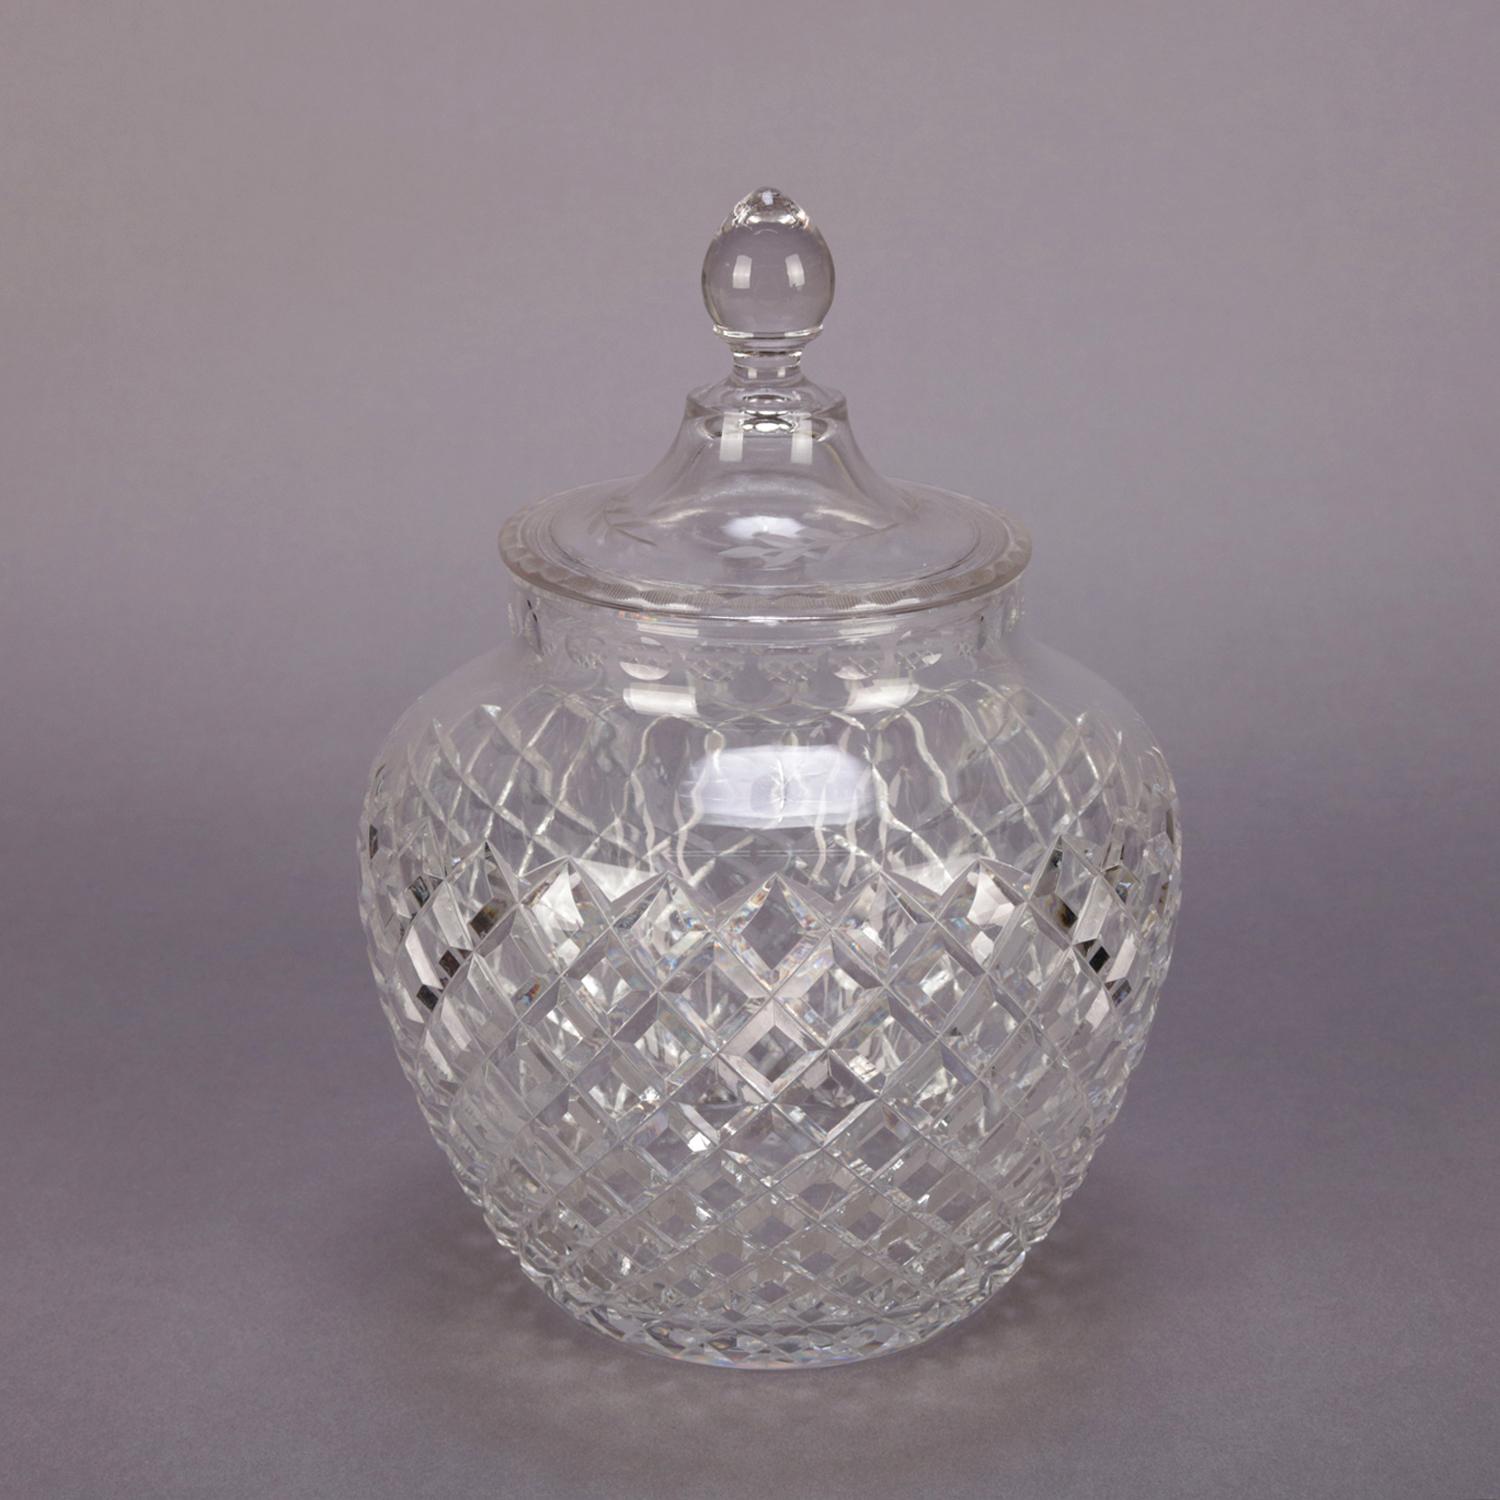 An antique American brilliant cut glass lidded jar by Hawkes features bowl with diamond cut pattern and finial lid, signed on base, 20th century.

Measures: 9